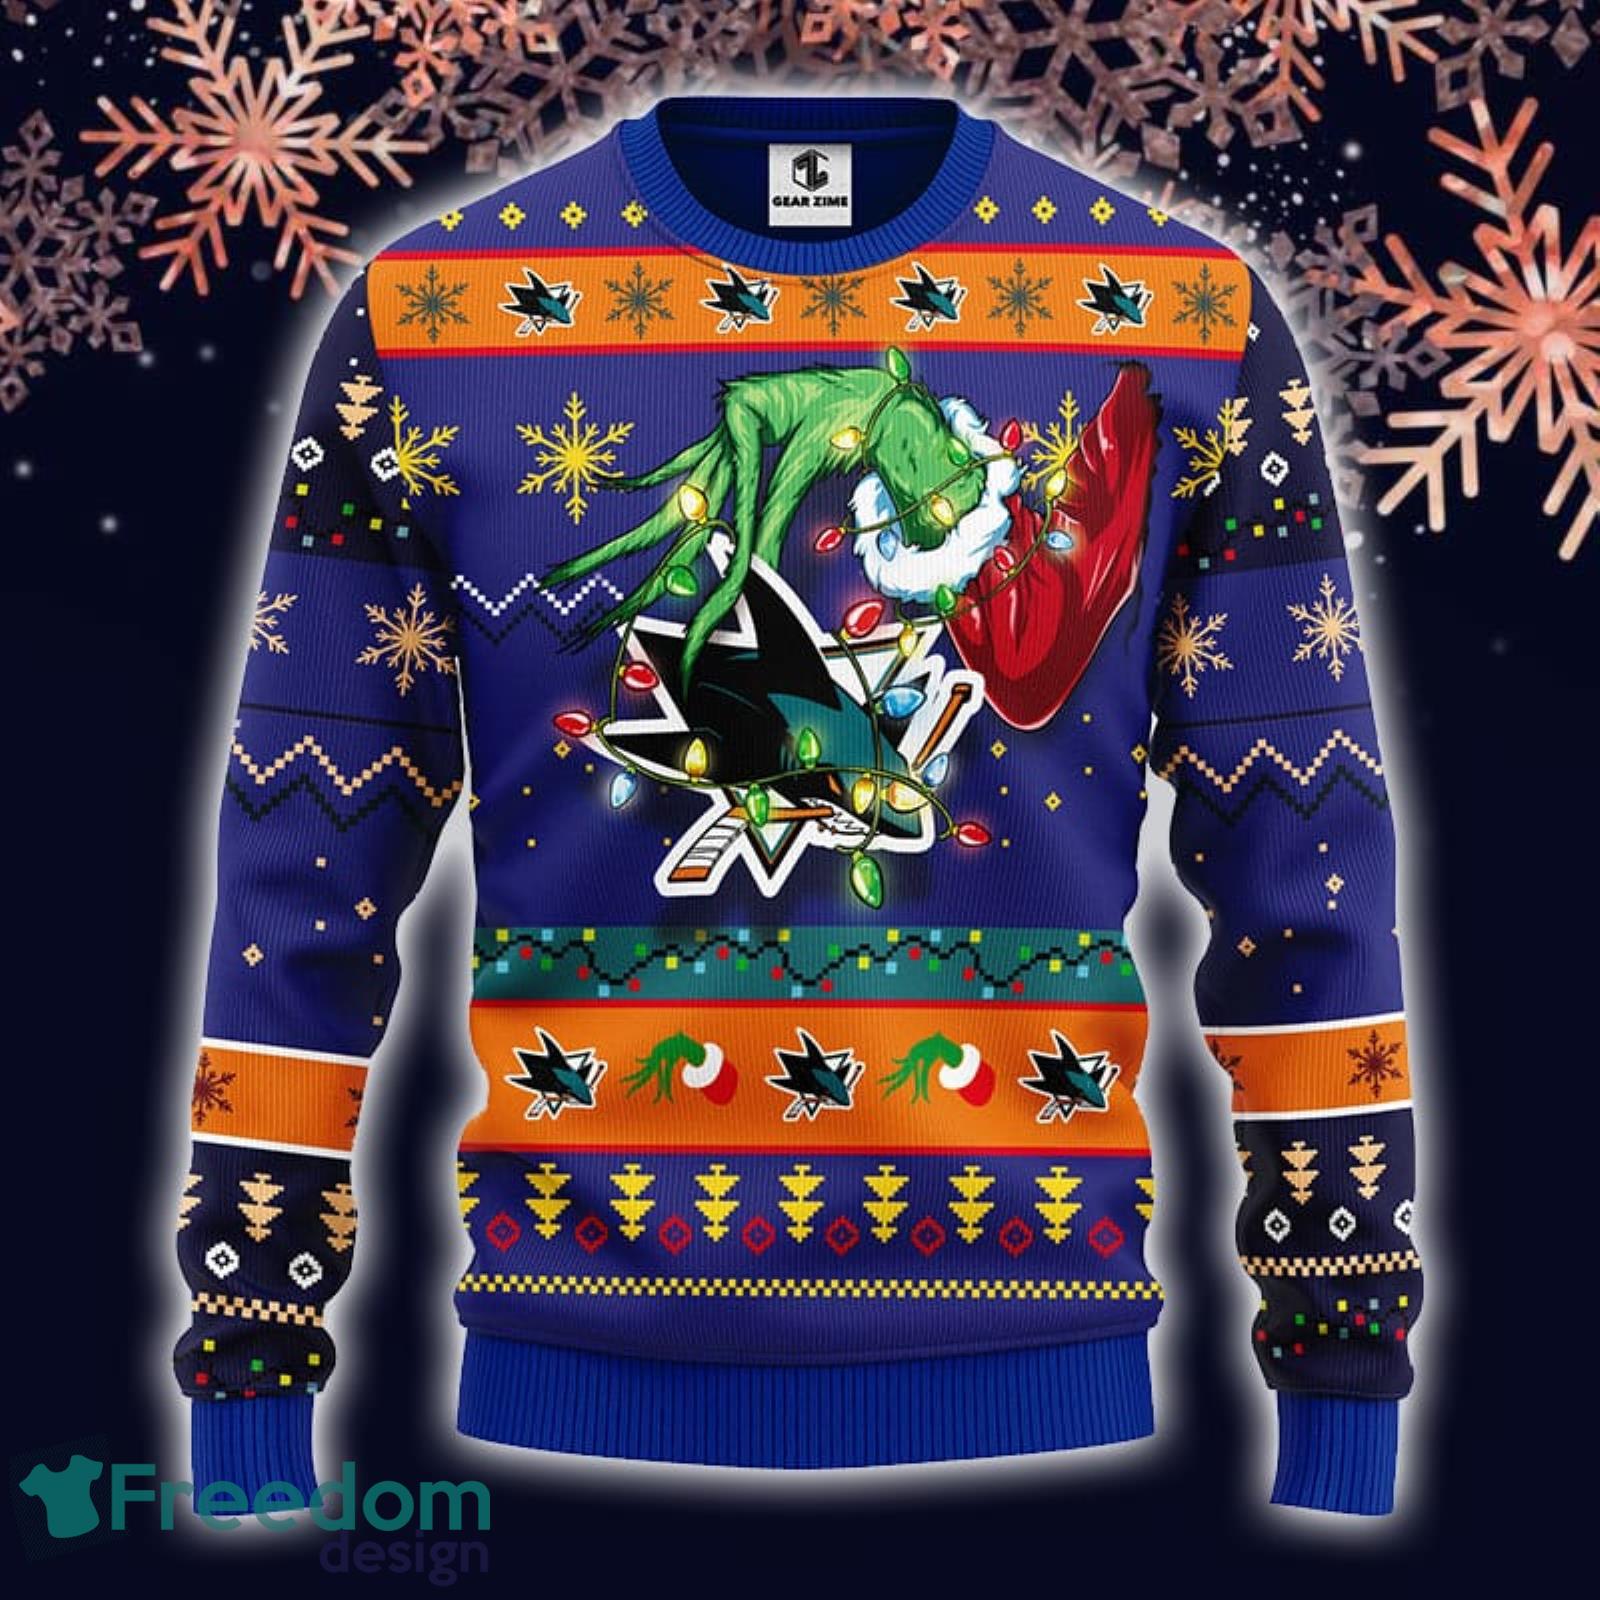 Pittsburgh Penguins NHL Mens Ugly Christmas Sweater Best Fans -  Freedomdesign